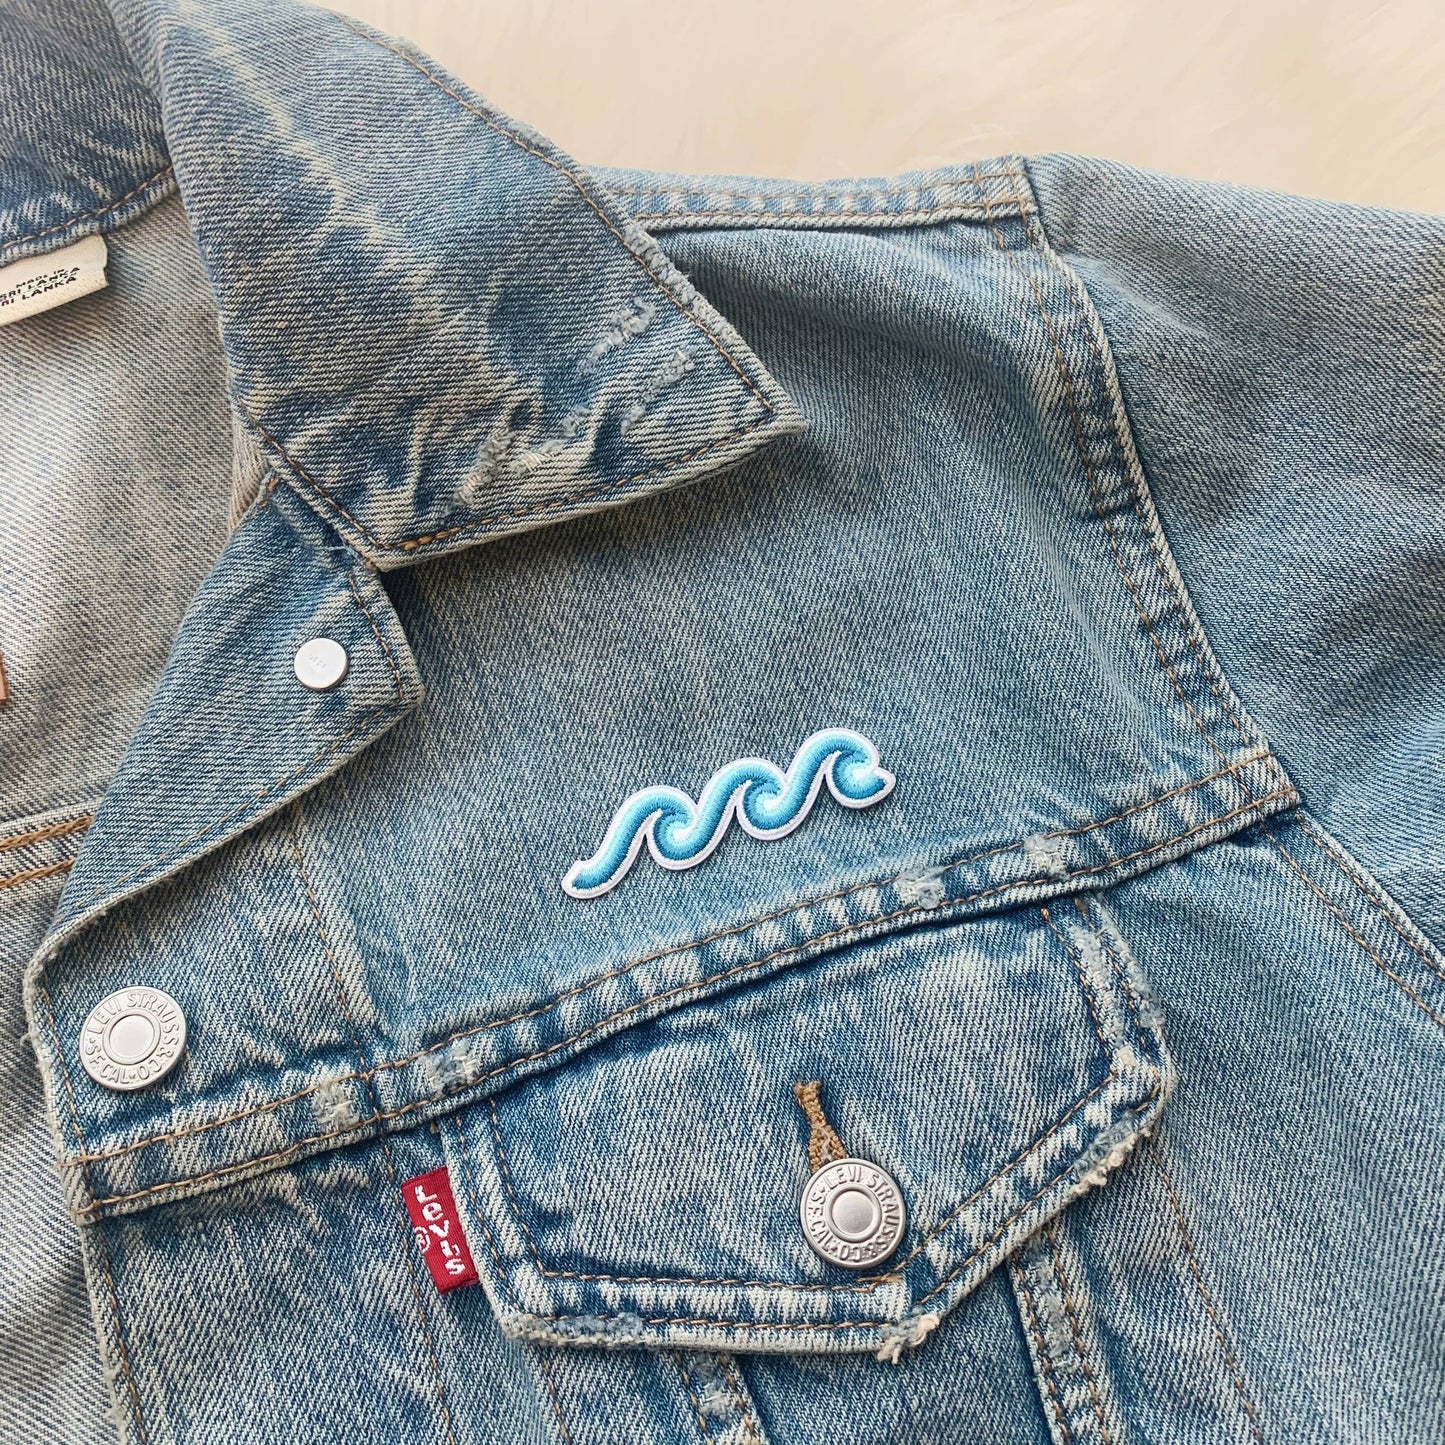 Simple Wave Patch | Embroidered Ocean Wave Applique